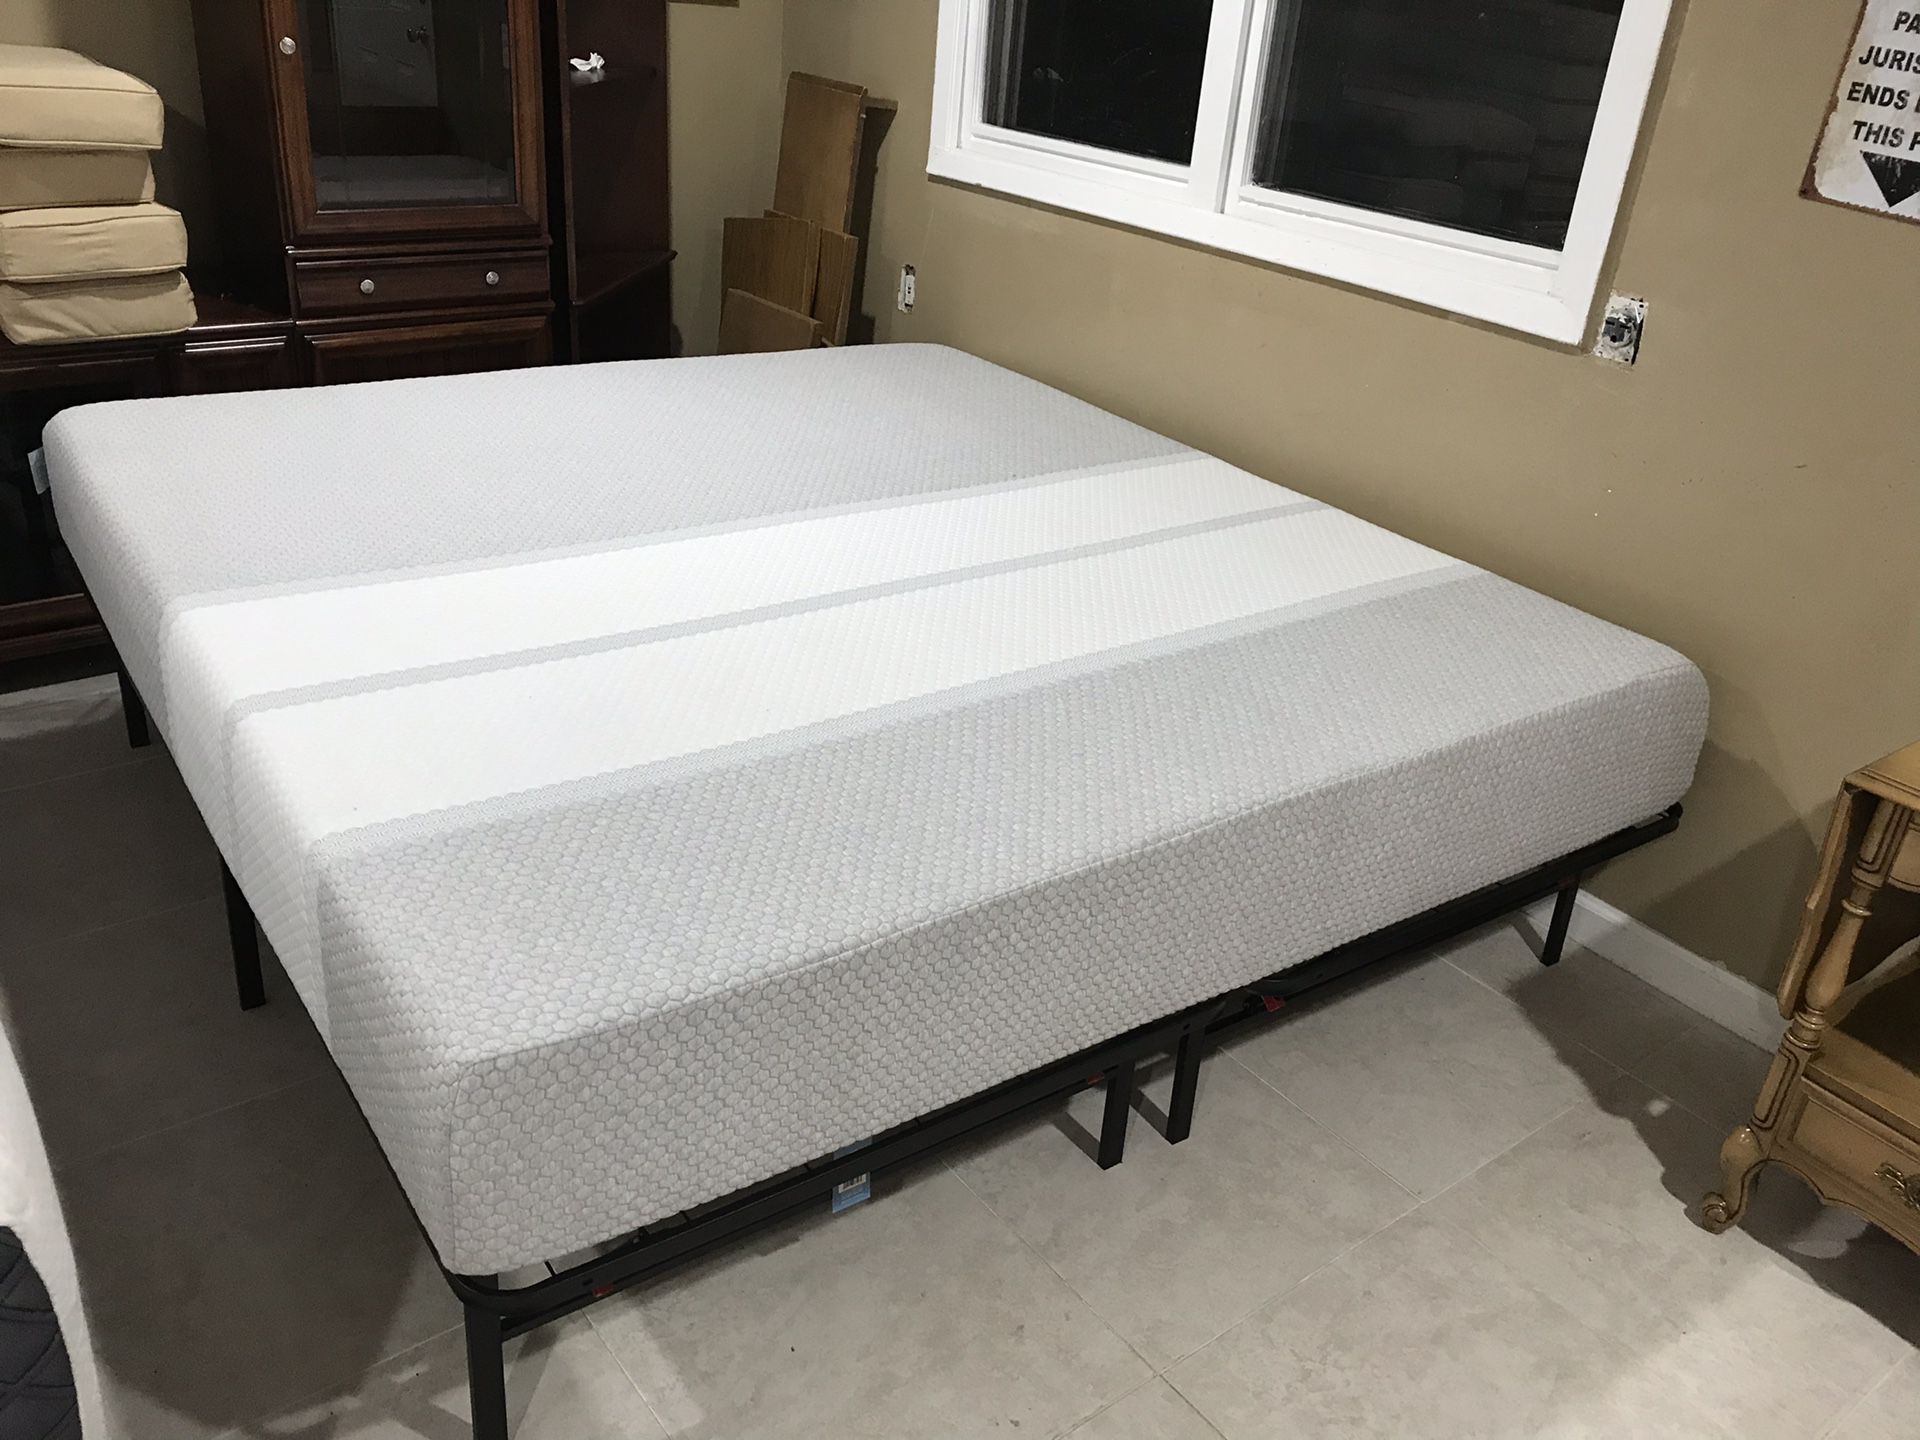 Nice king size bed comes with mattress and metal frame in good conditions